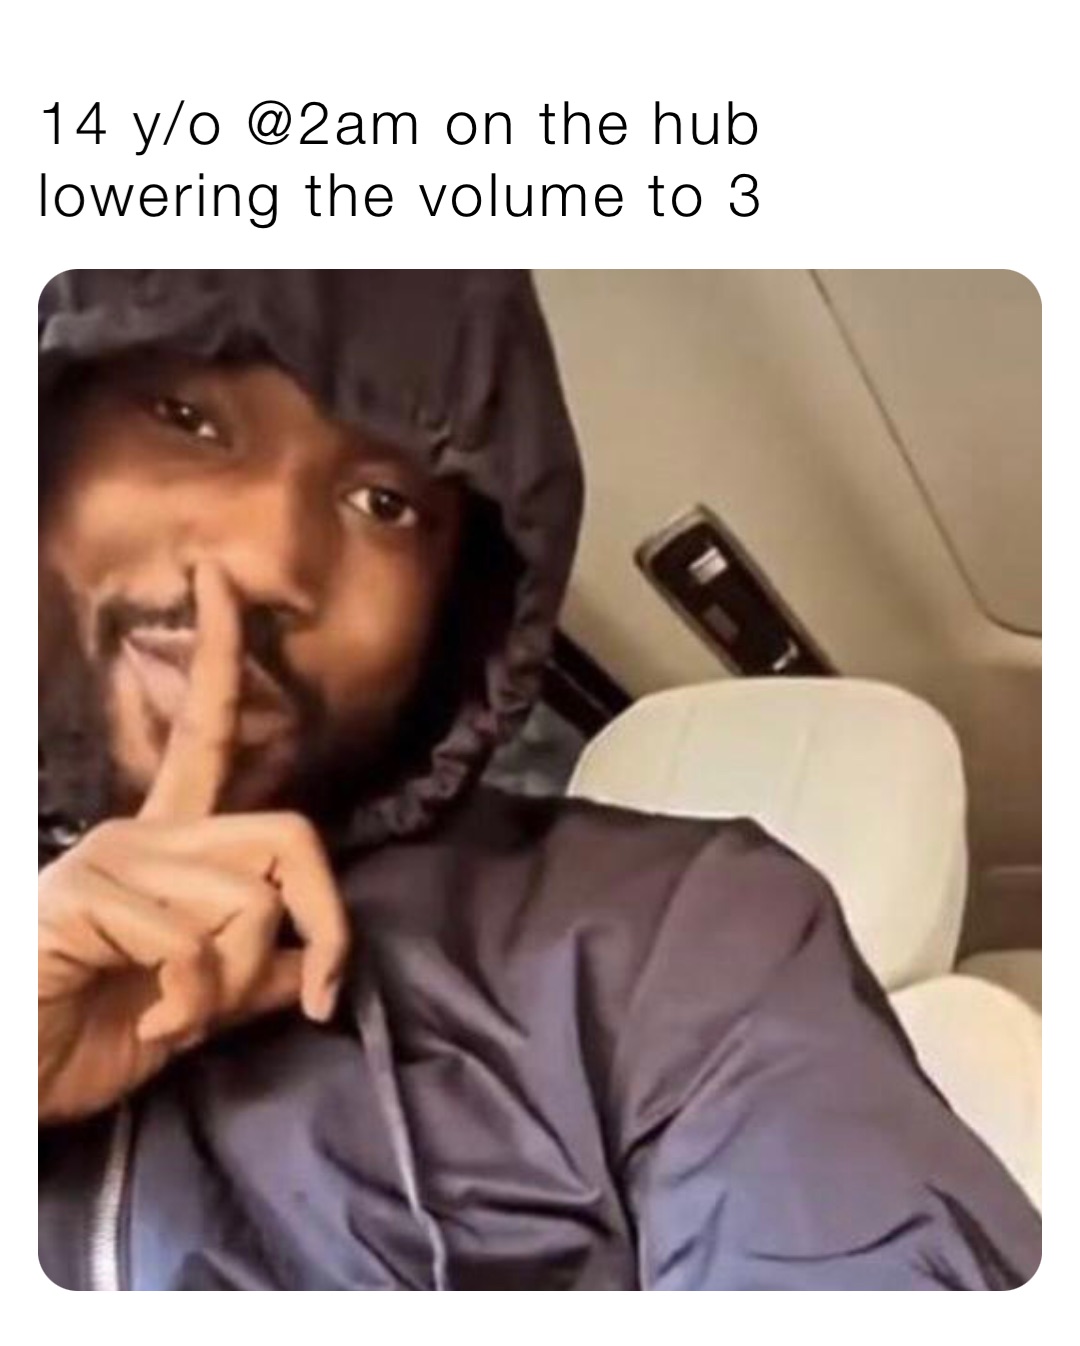 14 y/o @2am on the hub lowering the volume to 3